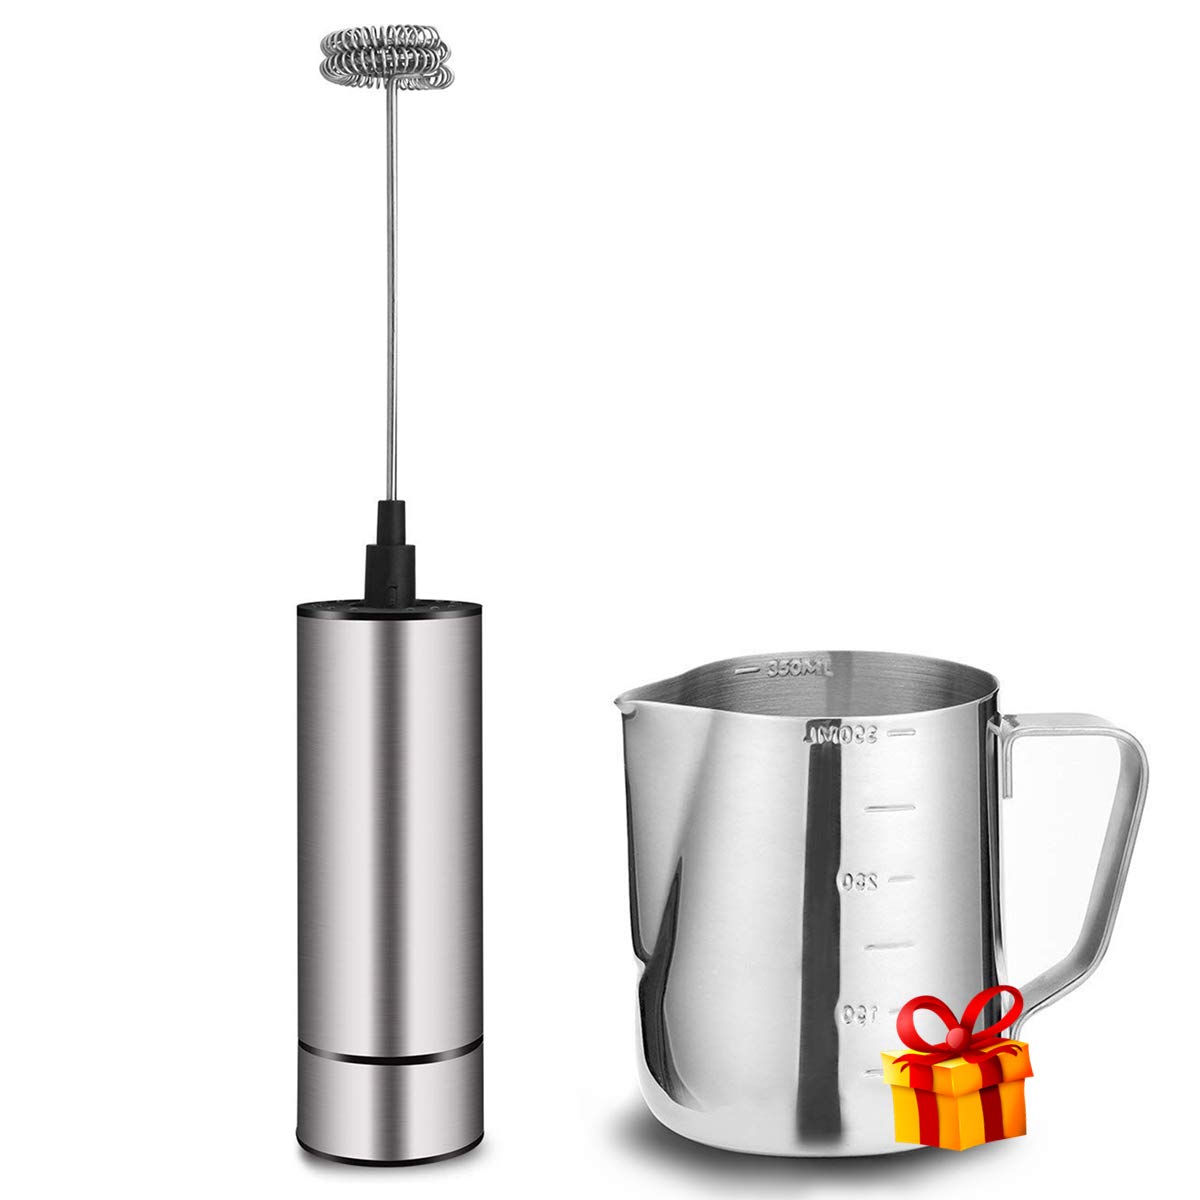 Bean Envy Handheld Milk Frother for Coffee - Nepal